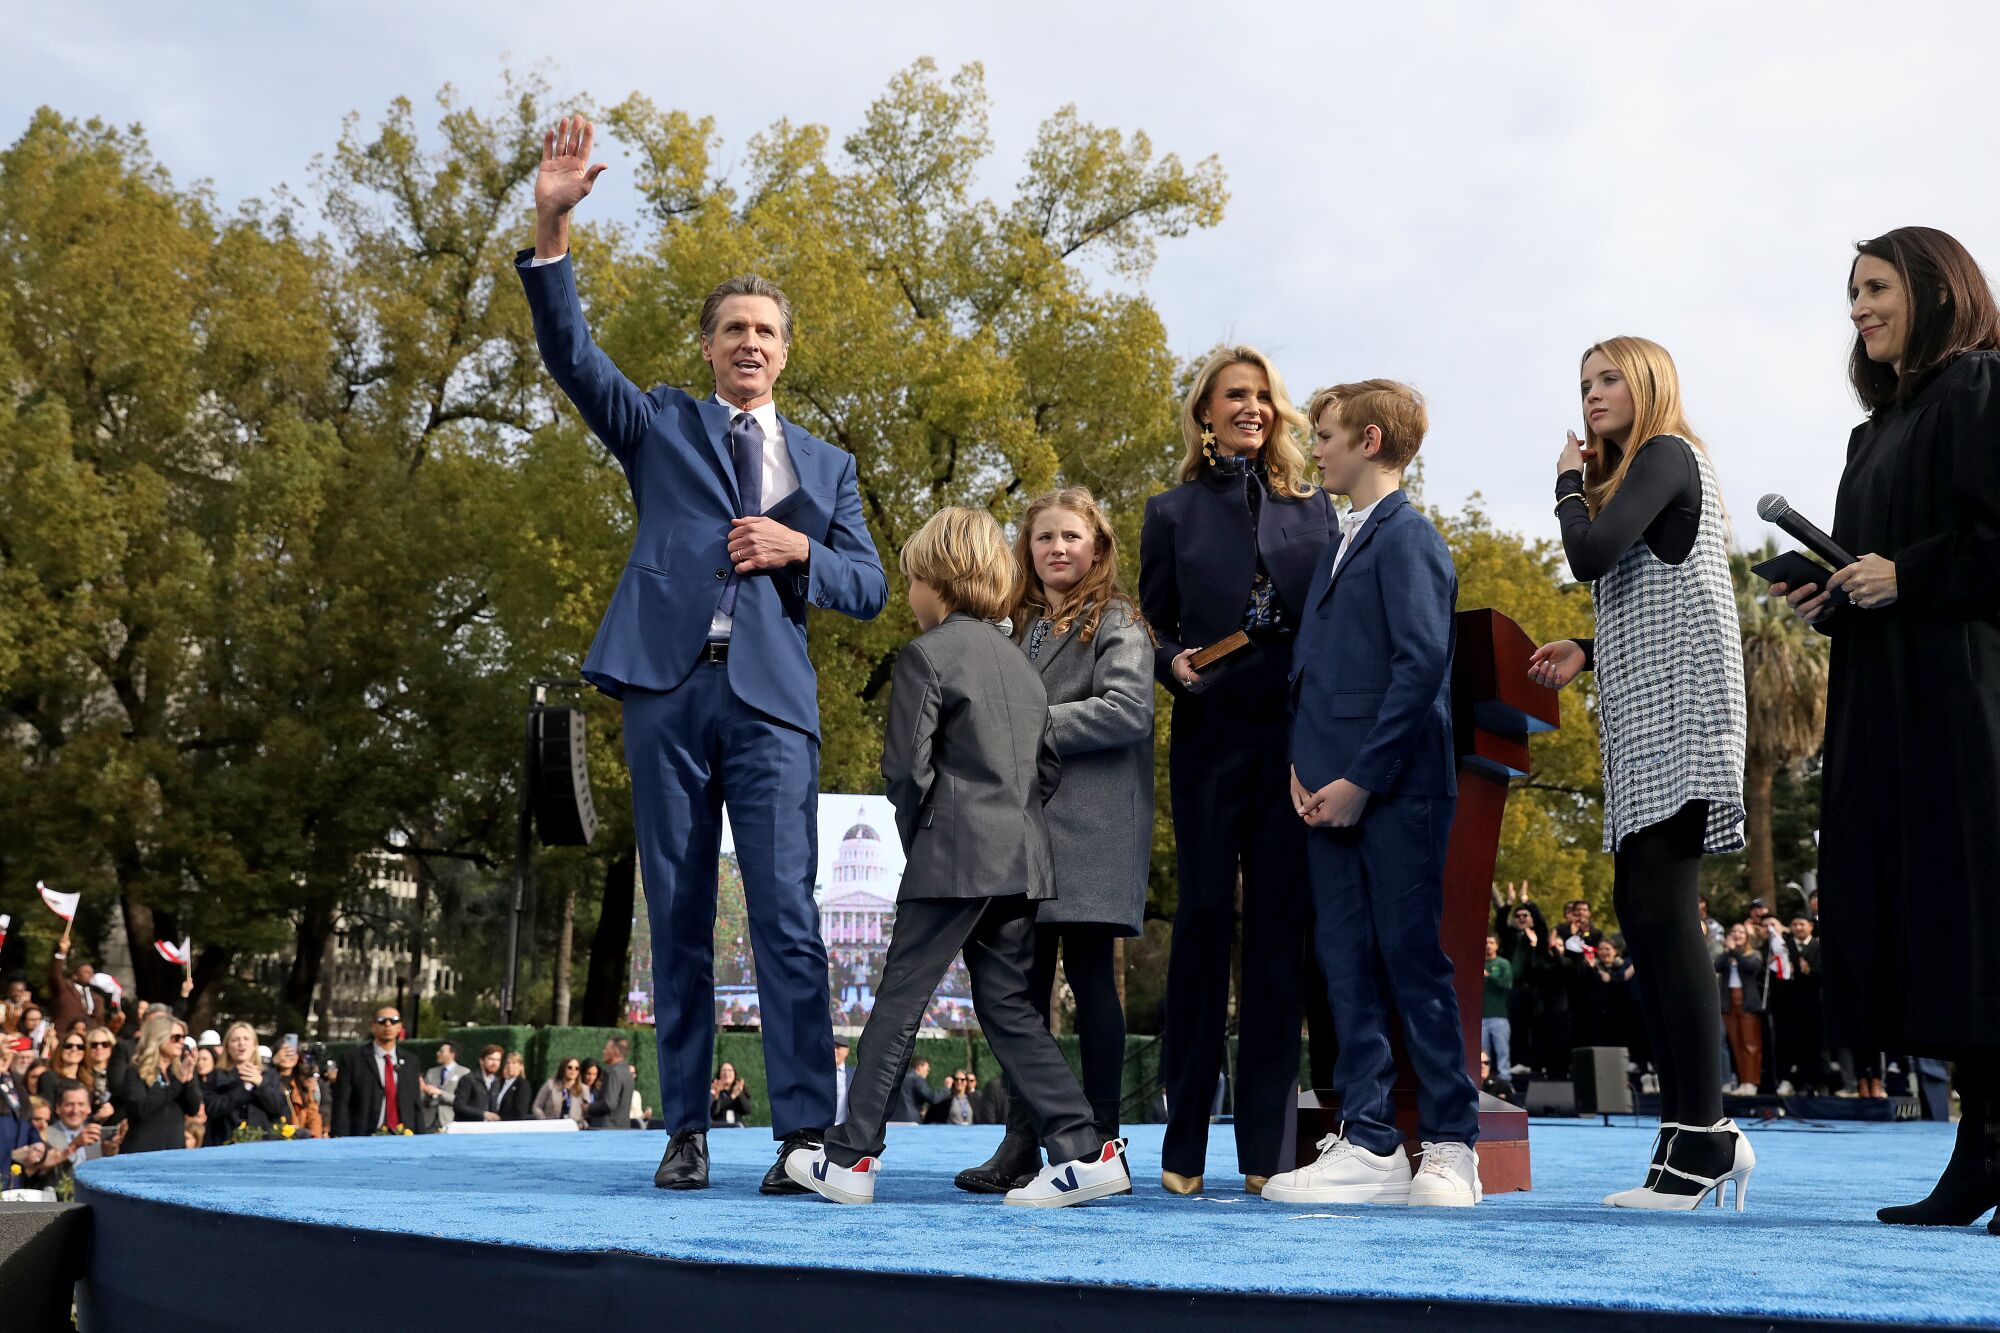 Governor Gavin Newsom waves from the stage with his family.